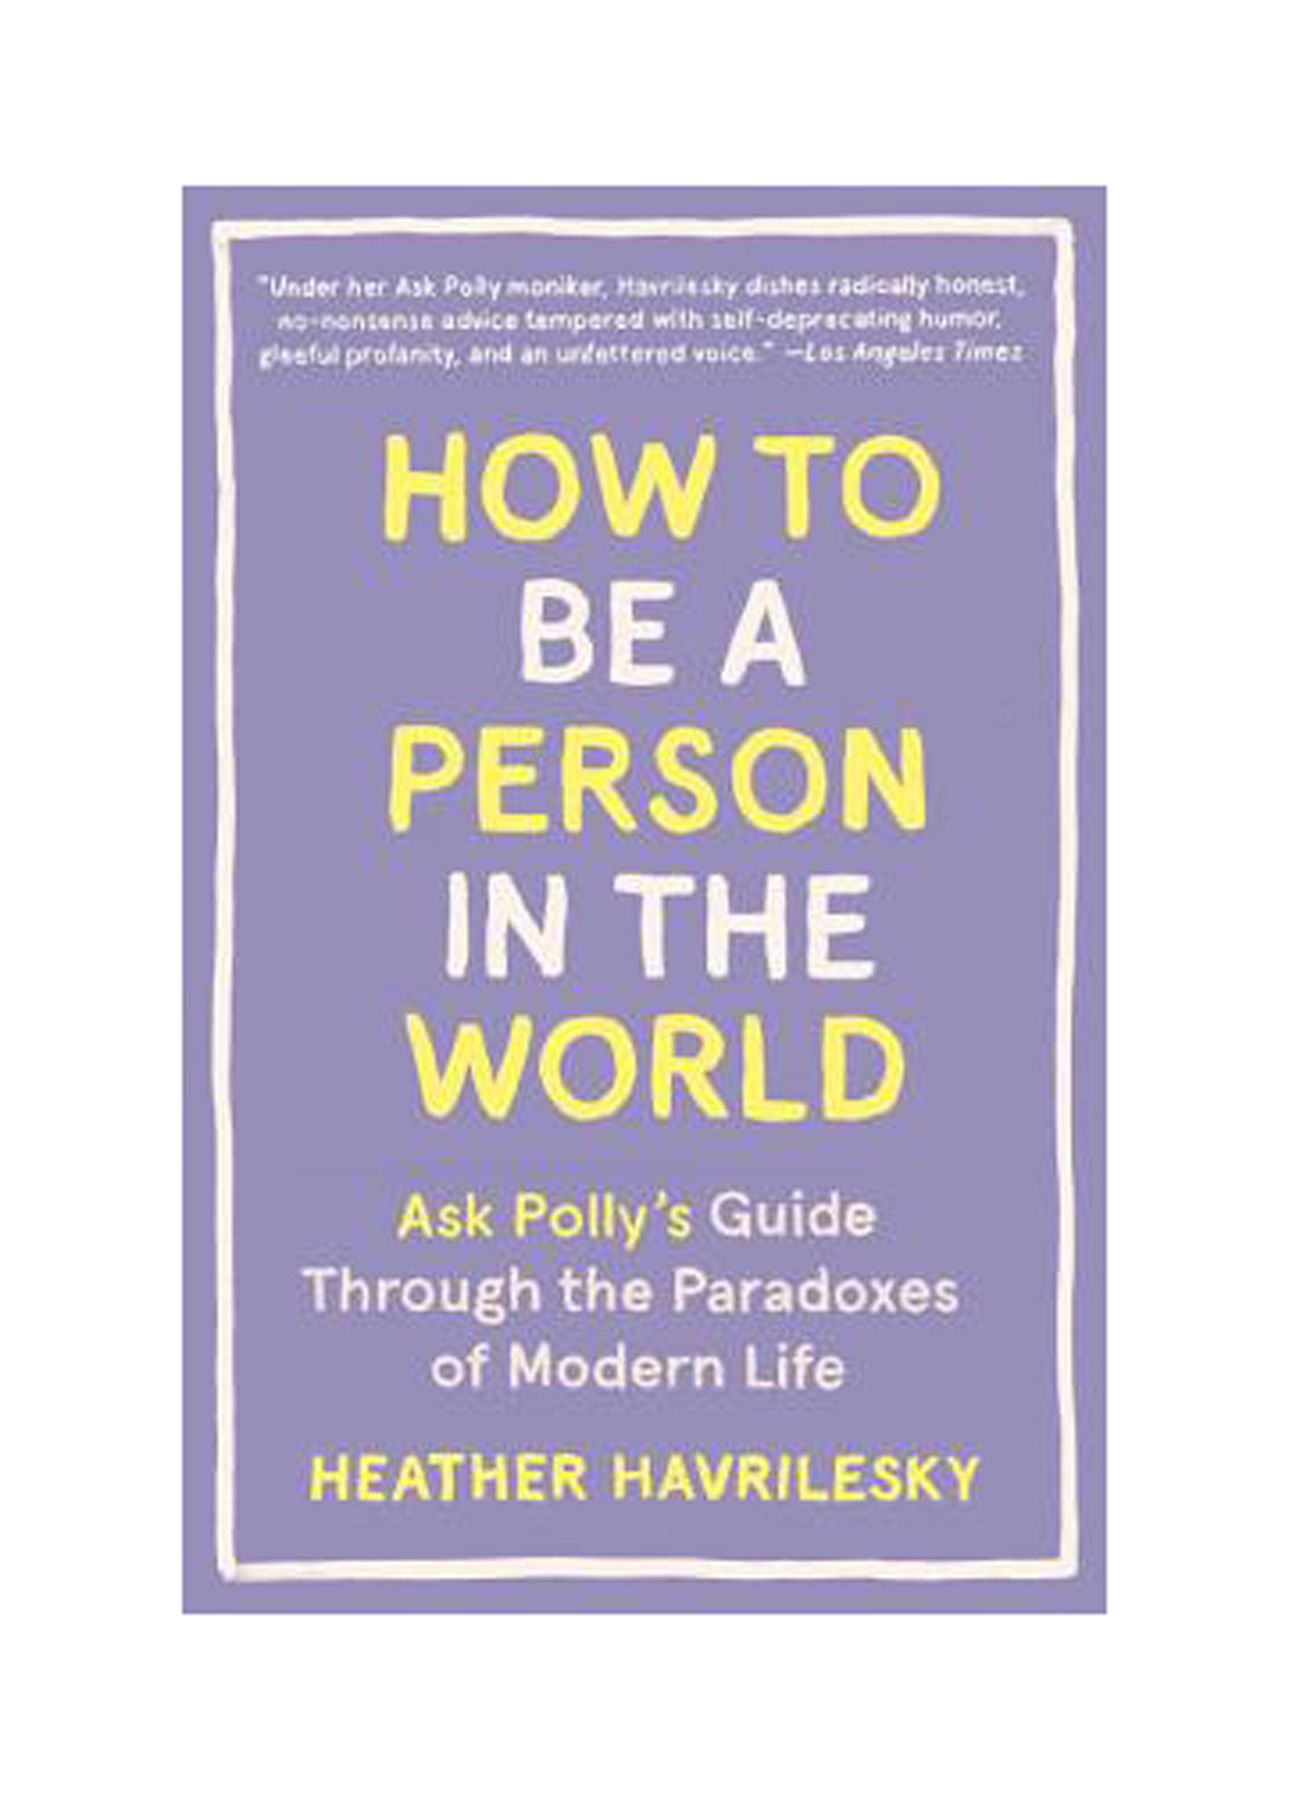 Good Books to Read in Your 20s: ‘How to Be a Person in the World: Ask Polly's Guide Through the Paradoxes of Modern Life’ by Heather Havrilesky